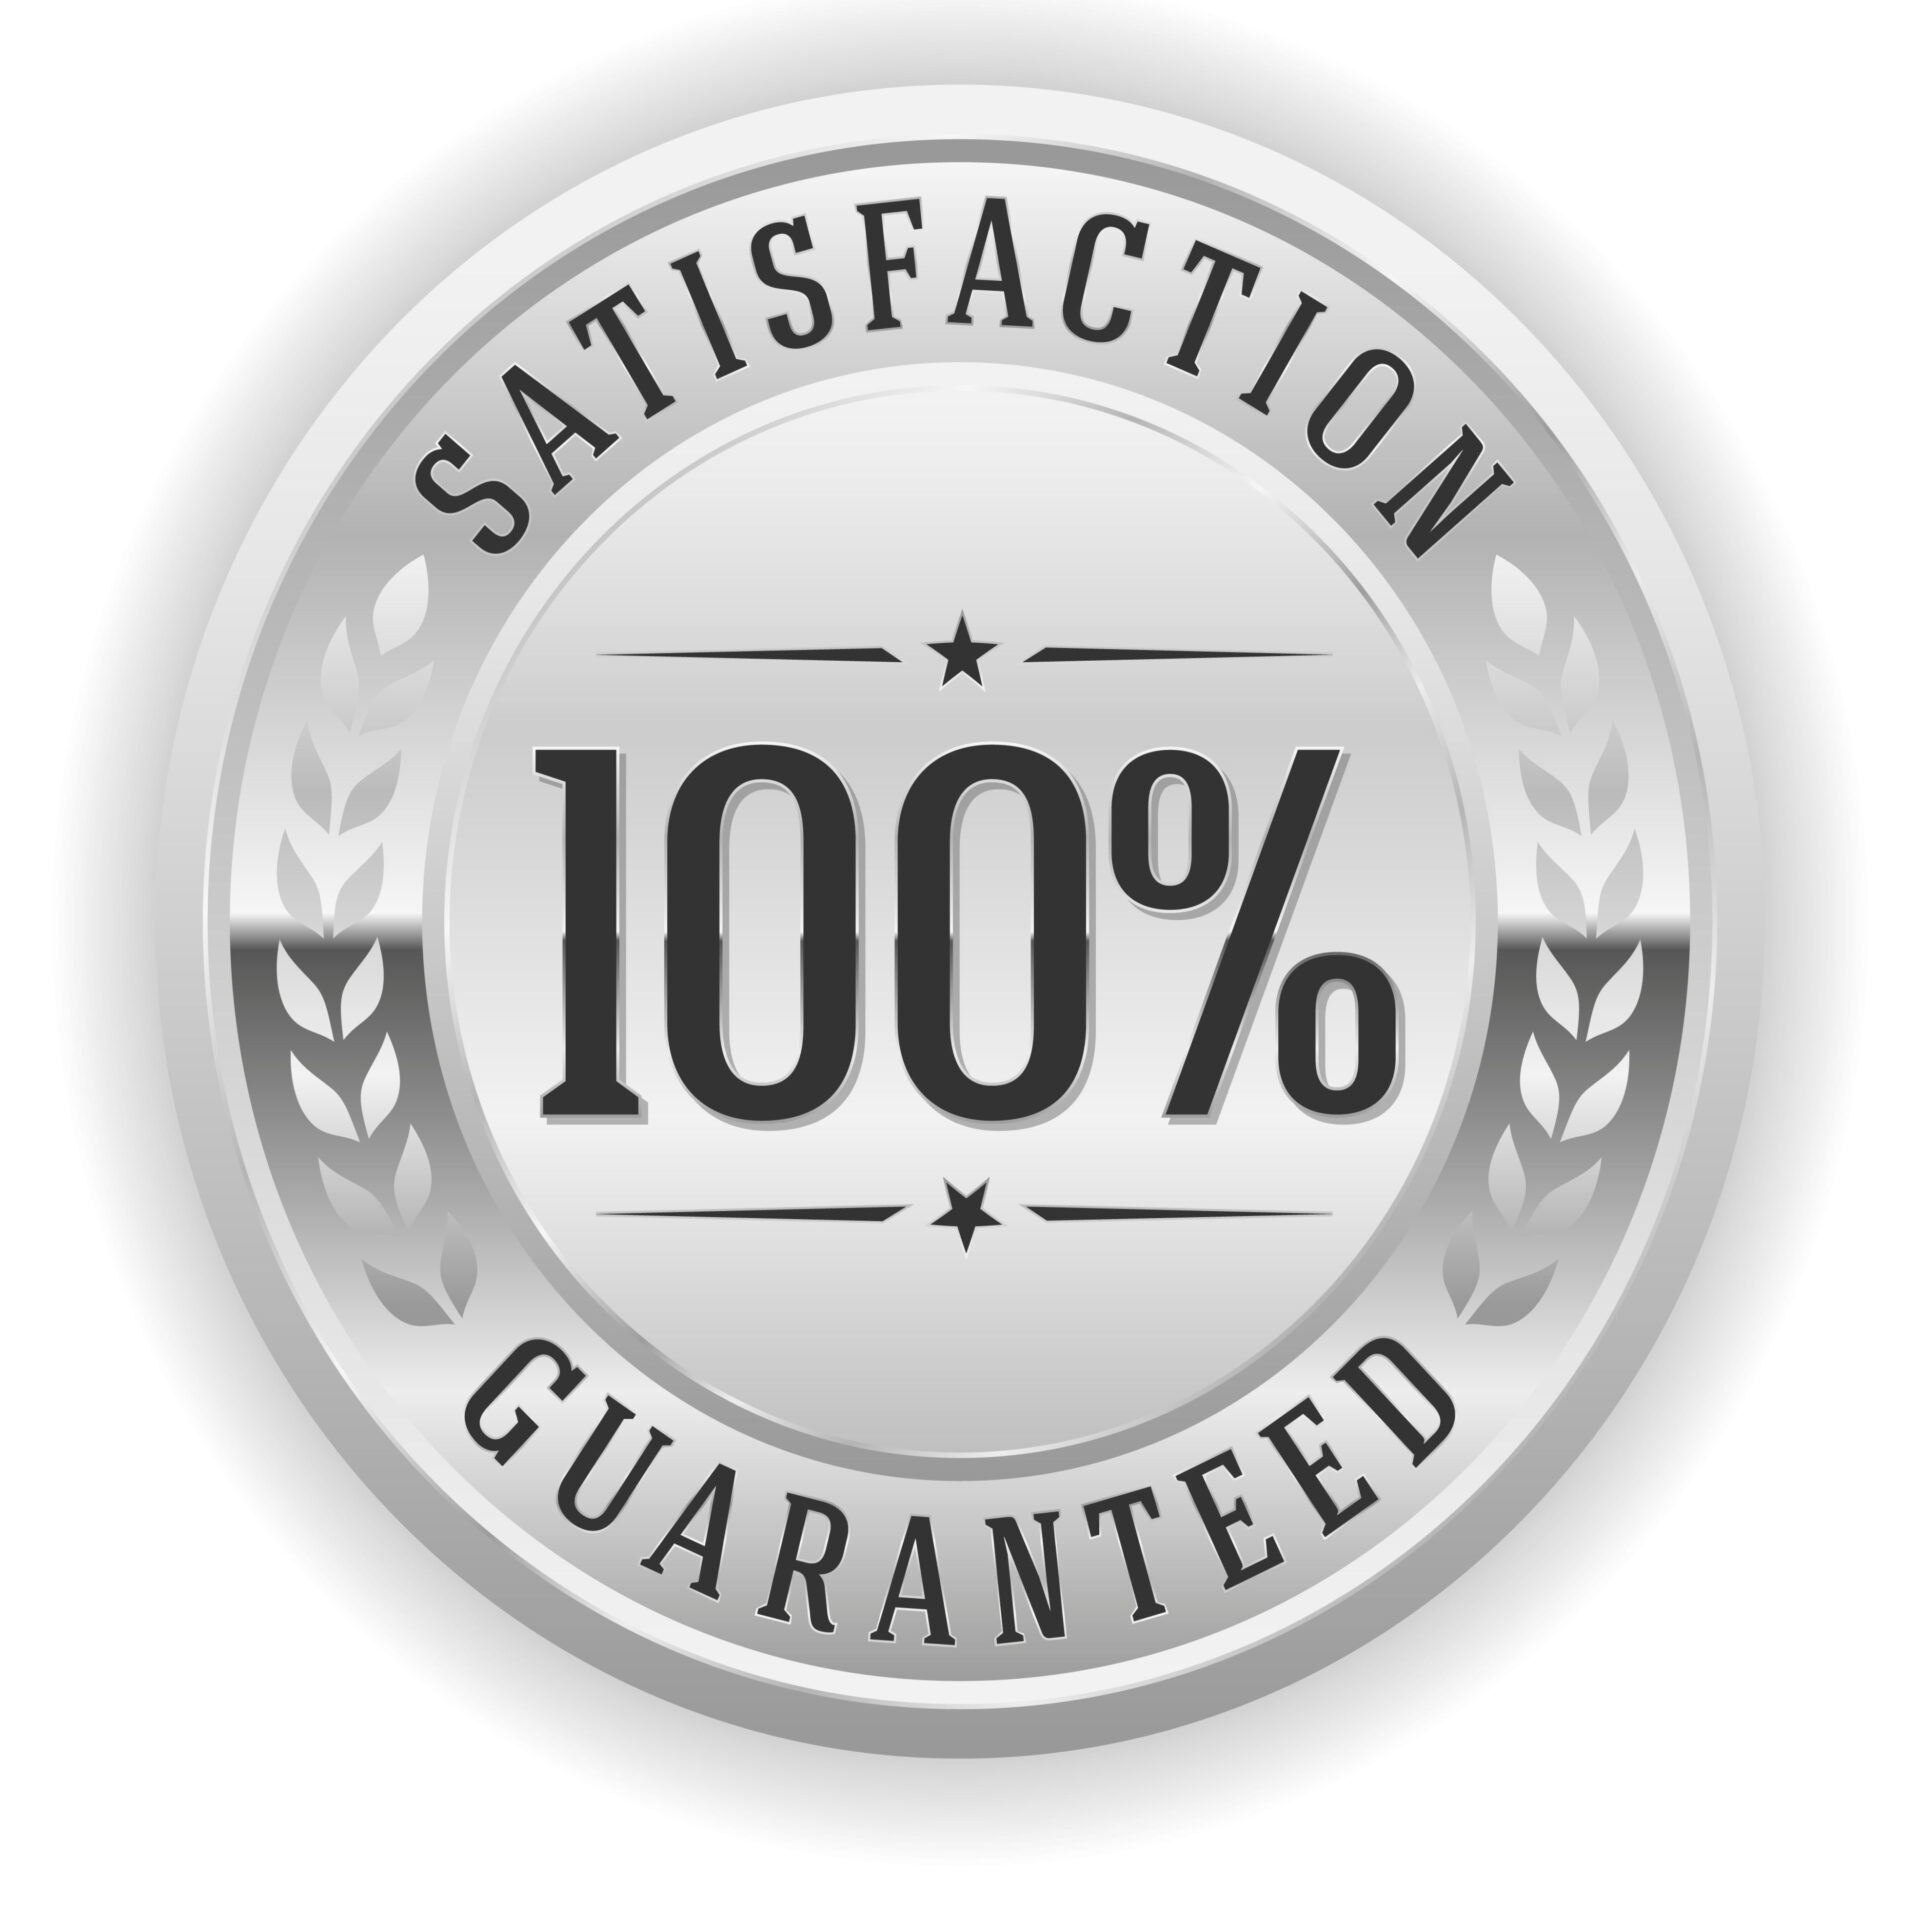 This image shows a silver and white satisfaction guaranteed badge that features the text "100% Satisfaction Guaranteed" surrounded by a laurel wreath design.